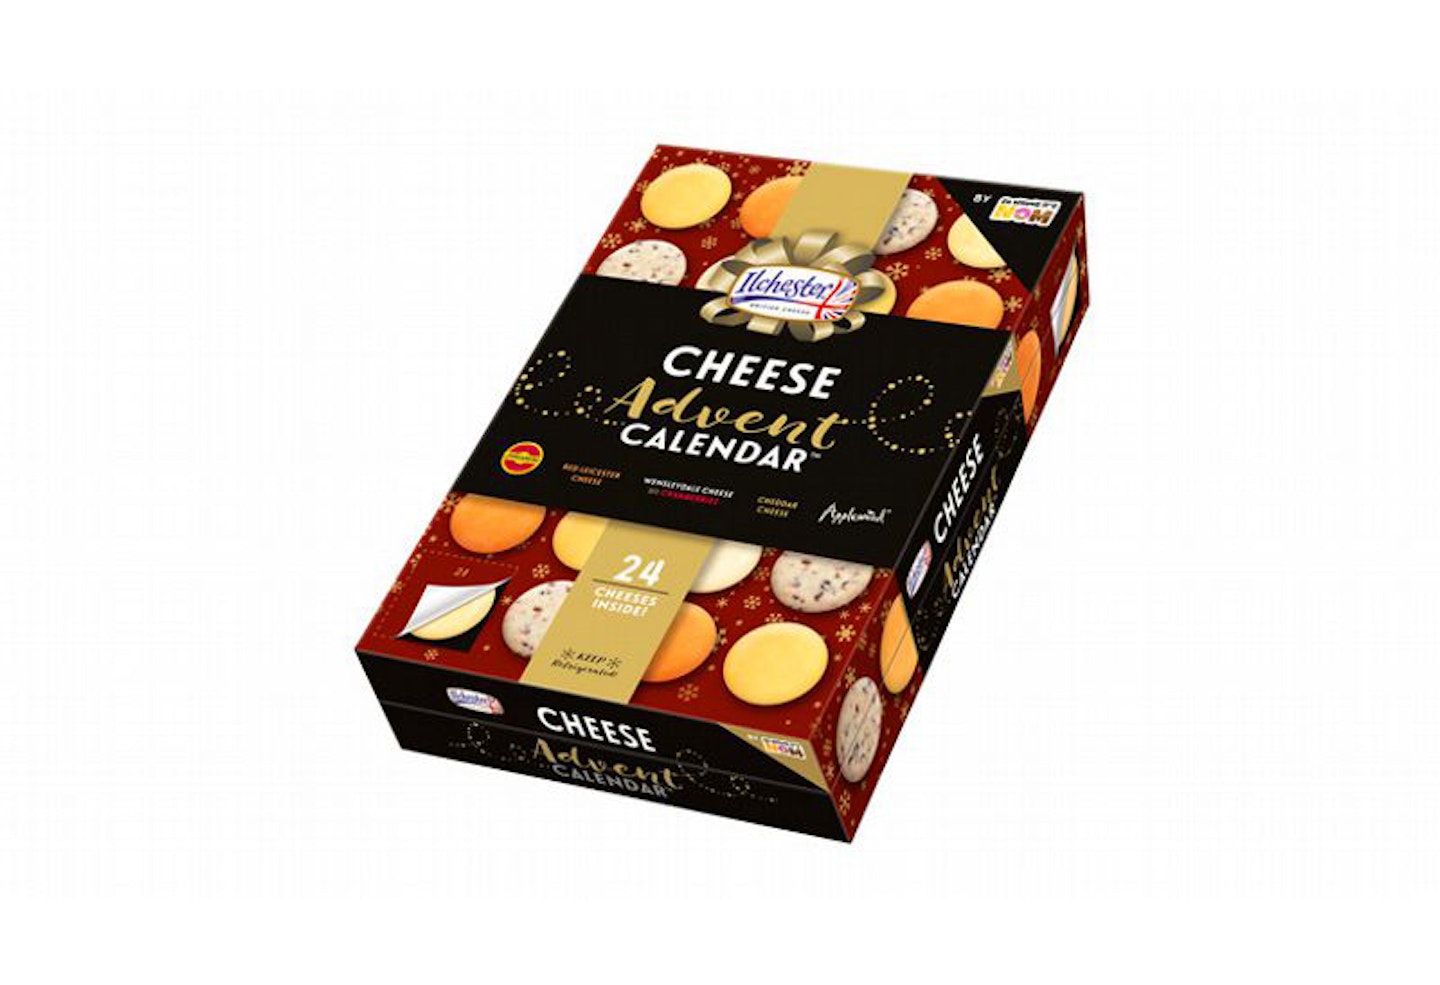 Cheese fans rejoice – there’s a CHEESE advent calendar